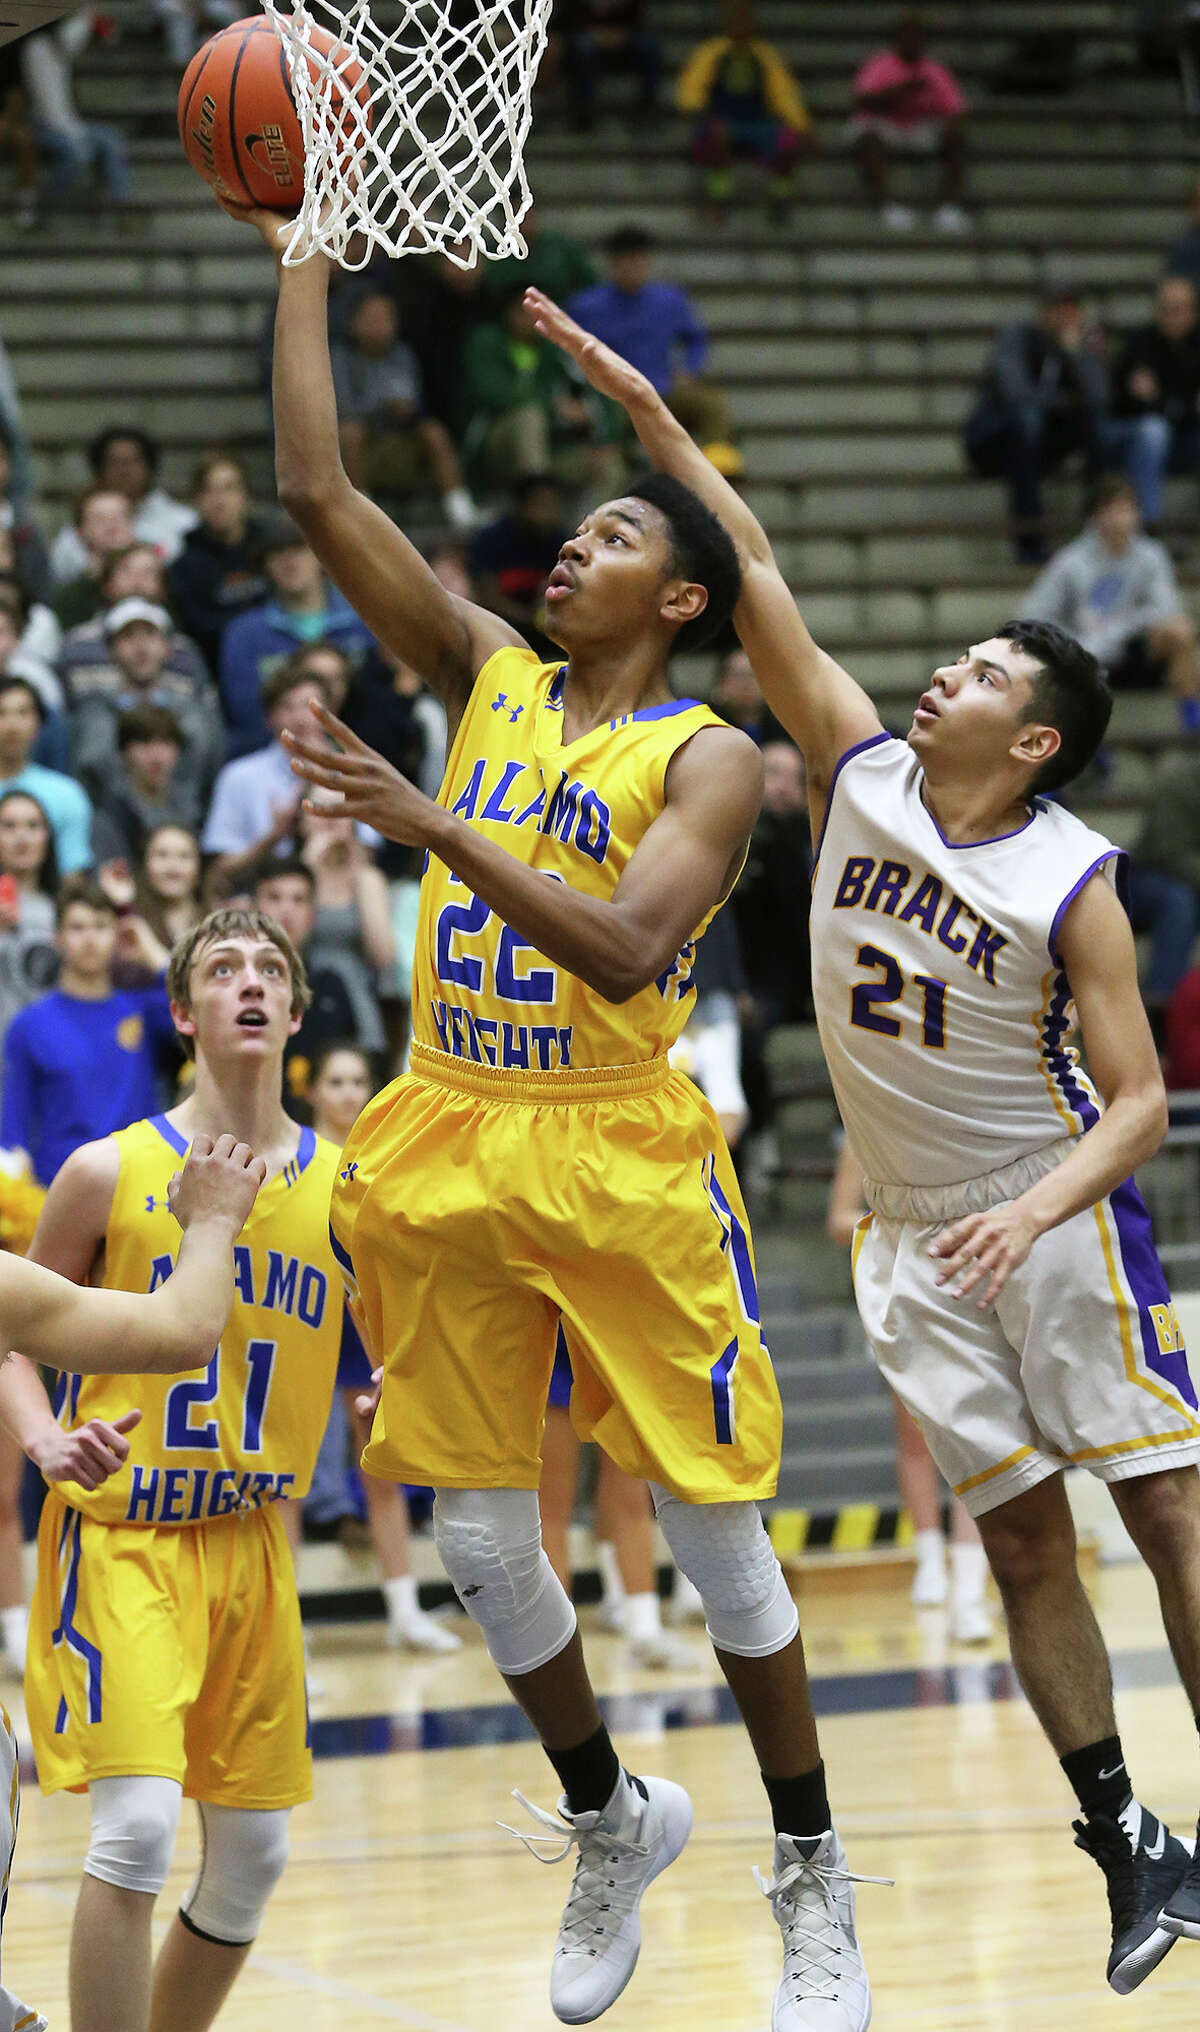 Mule guard Jonathan Dunn gets past Nathan Avila to score as Alamo Heights plays Brackenridge in 5A bidistrict basketball at the Alamo Convocation Center on February 23, 2016.